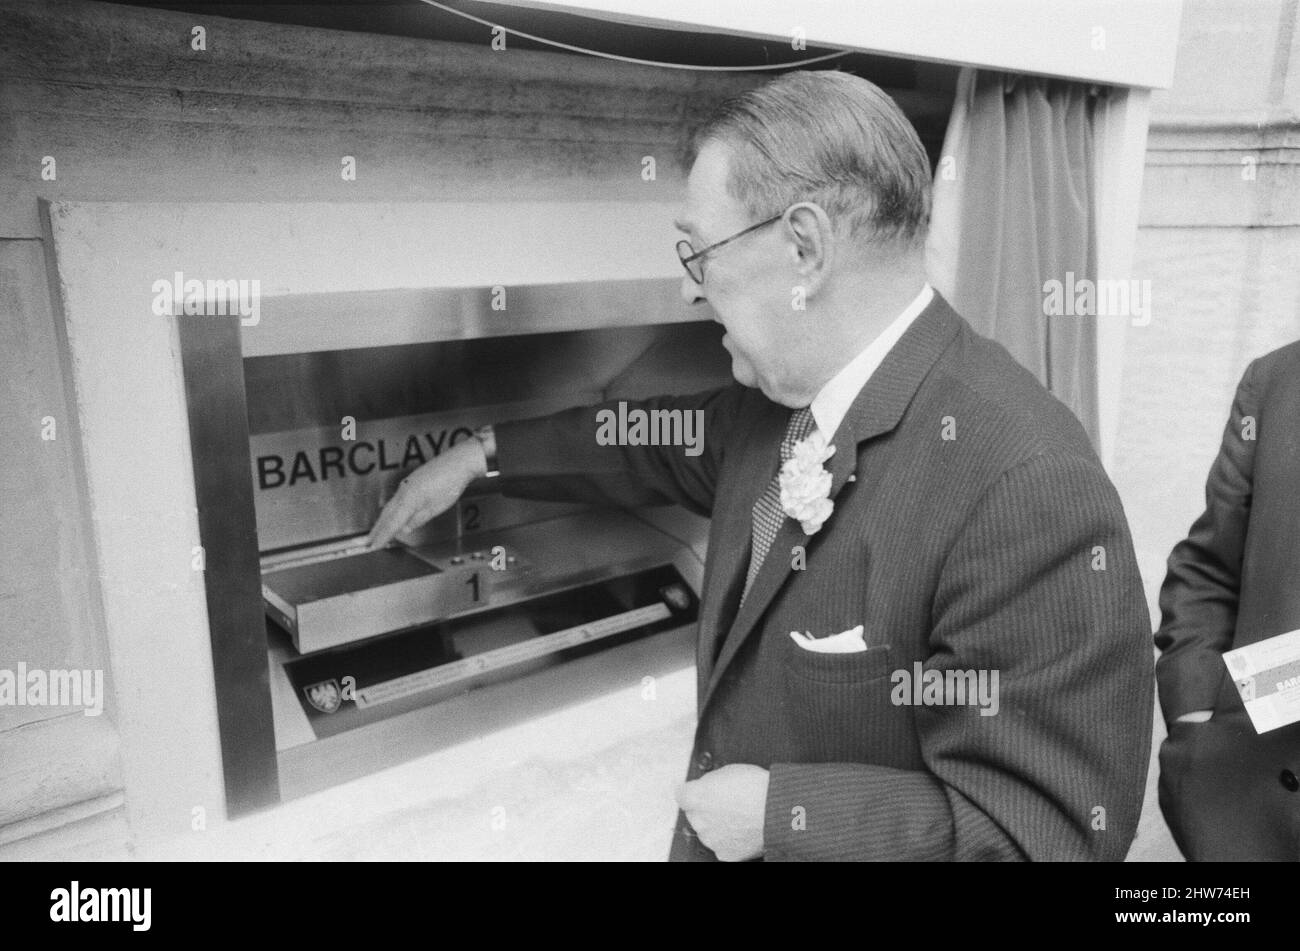 The Worlds First ATM, Cash Machine is unveiled at Barclays Bank, in Enfield, Middlesex, just North of London. 27th June 1967. Picture shows a customer using the machine.  Barclays ATM, 27th June 1967. Sir Thomas Bland, Deputy Chairman of Barclays Bank, unveils a robot cashier that dispenses cash at any time of the day or night. Designed and developed jointly with De la rue Instruments & the banks Management Services Department, the BarclayCash machine is installed at the Enfield branch. Actor, Reg Varney took time off from filming for the TV series 'Beggar Your Neighbour' at Northwood to be th Stock Photo